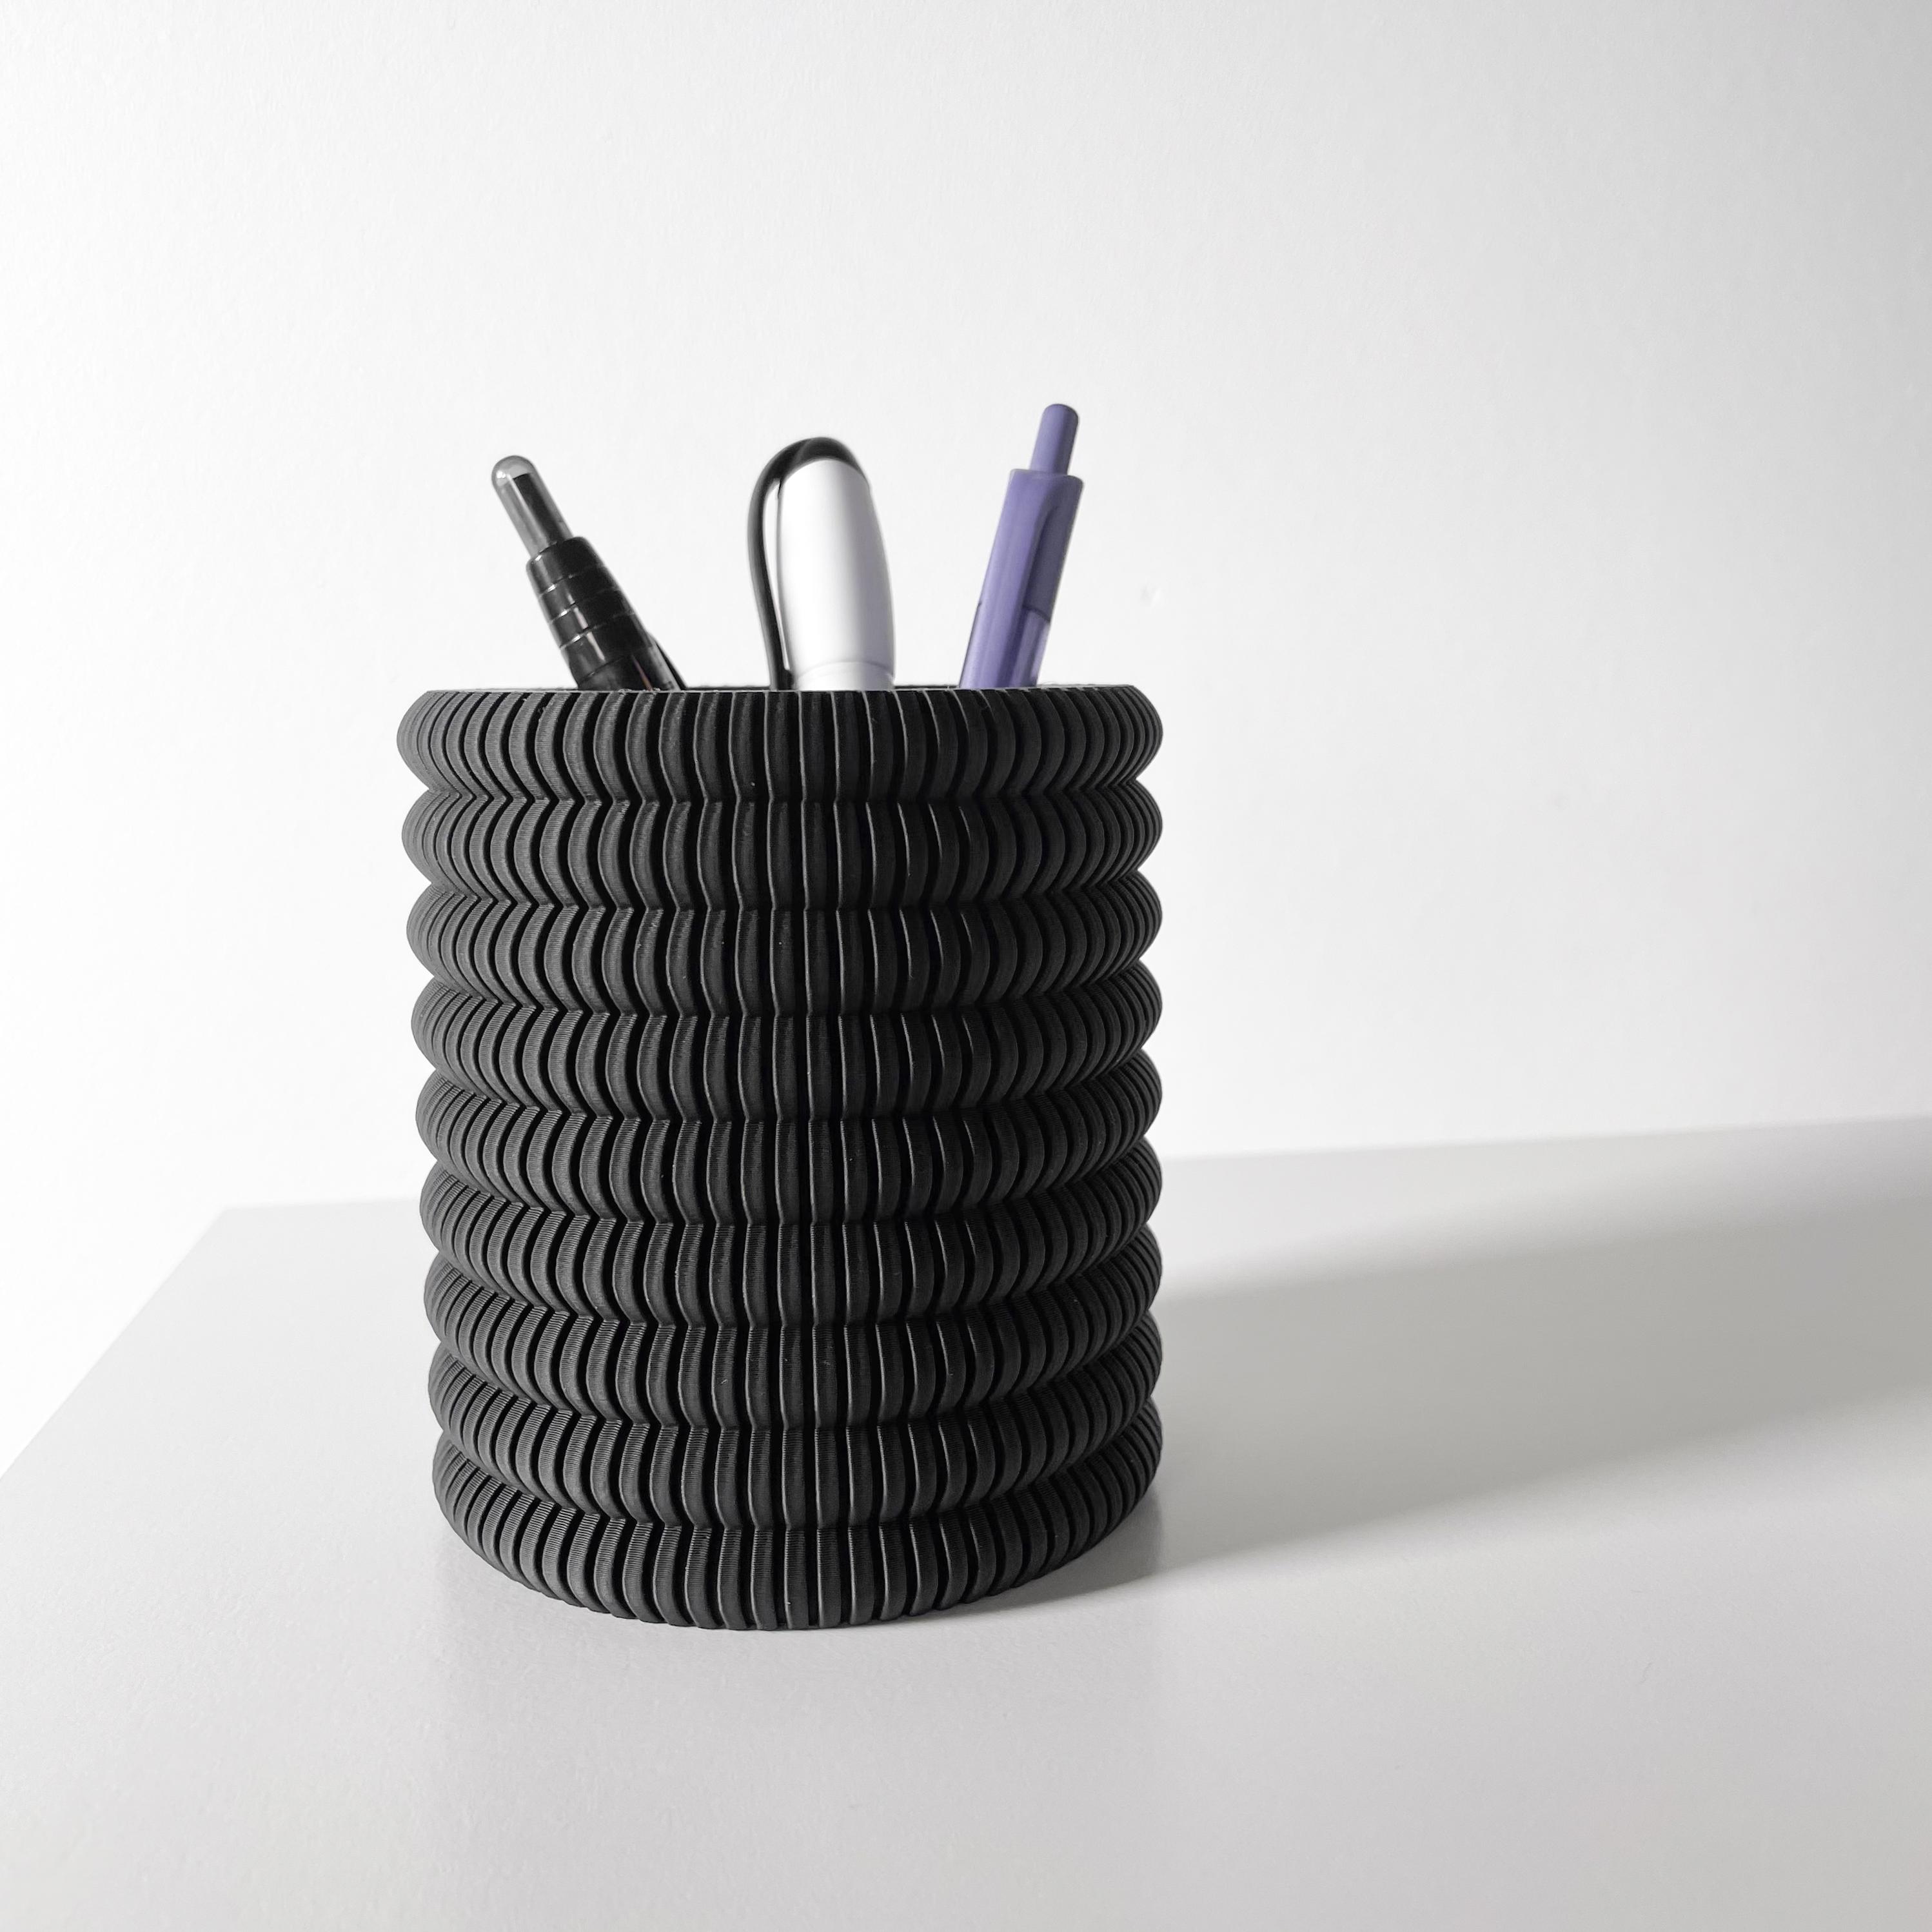 The Lonu Pen Holder | Desk Organizer and Pencil Cup Holder | Modern Office and Home Decor 3d model